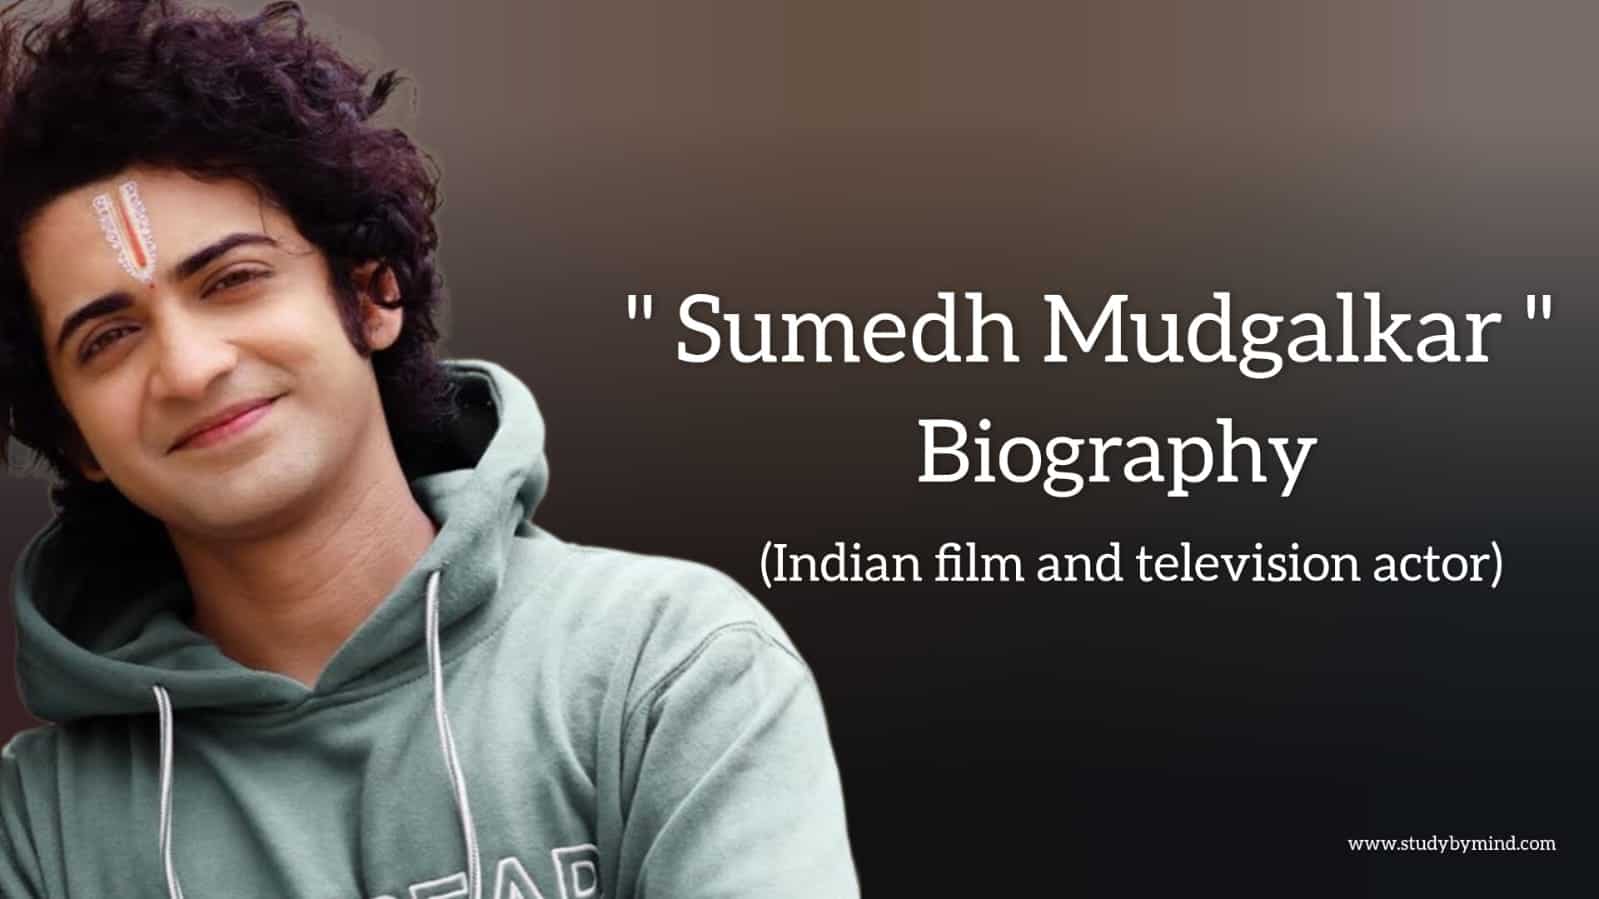 You are currently viewing Sumedh Mudgalkar biography in english (film and television actor)